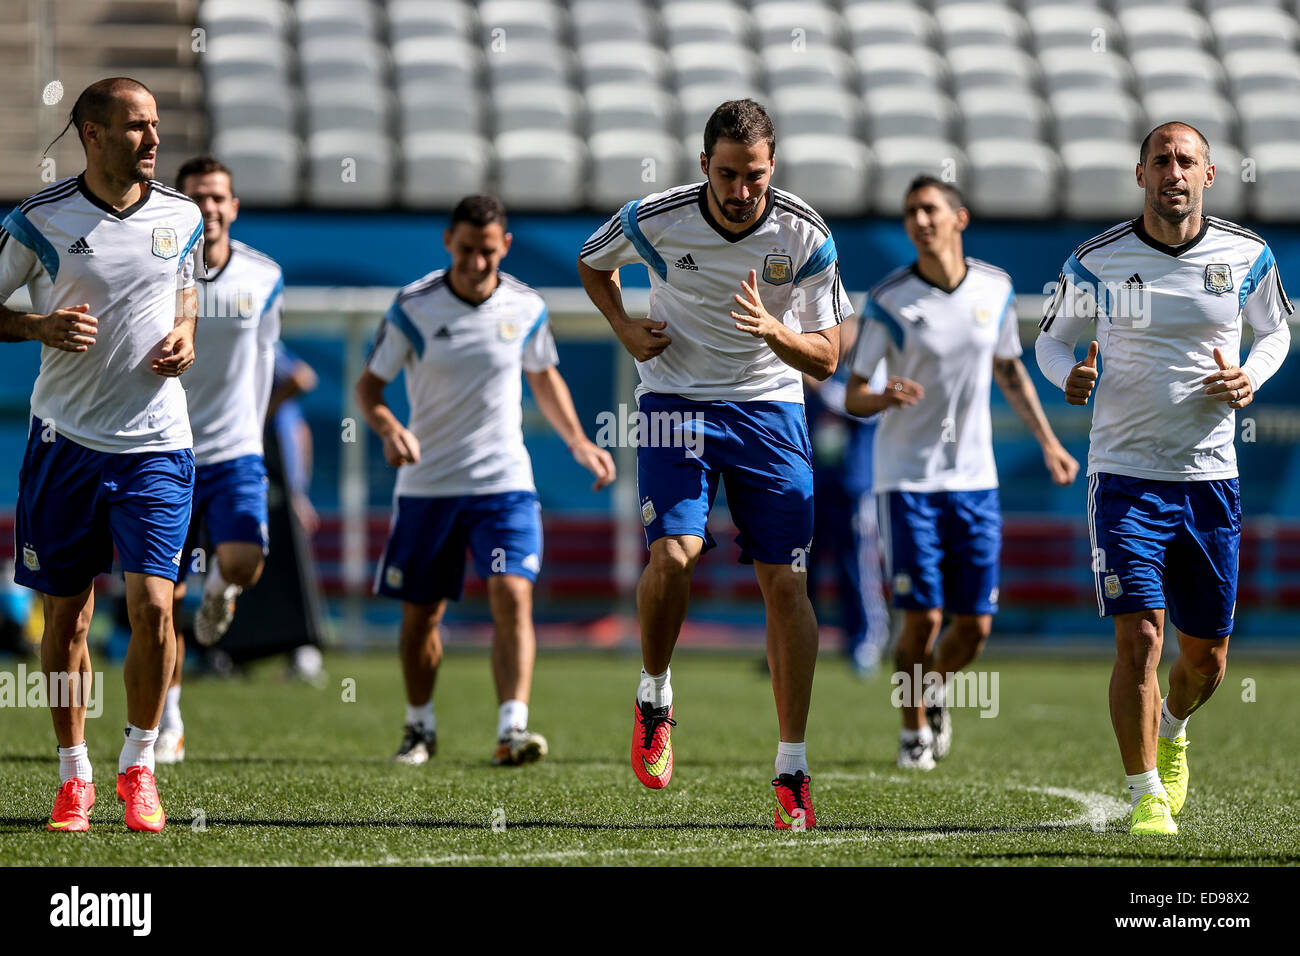 2014 FIFA World Cup - Argentina national football team training held at Arena Corinthians, preparing for their match against Switzerland tomorrow (01Jul14).  Featuring: Gonzalo Higuain Where: Sao Paulo, Brazil When: 30 Jun 2014 Stock Photo